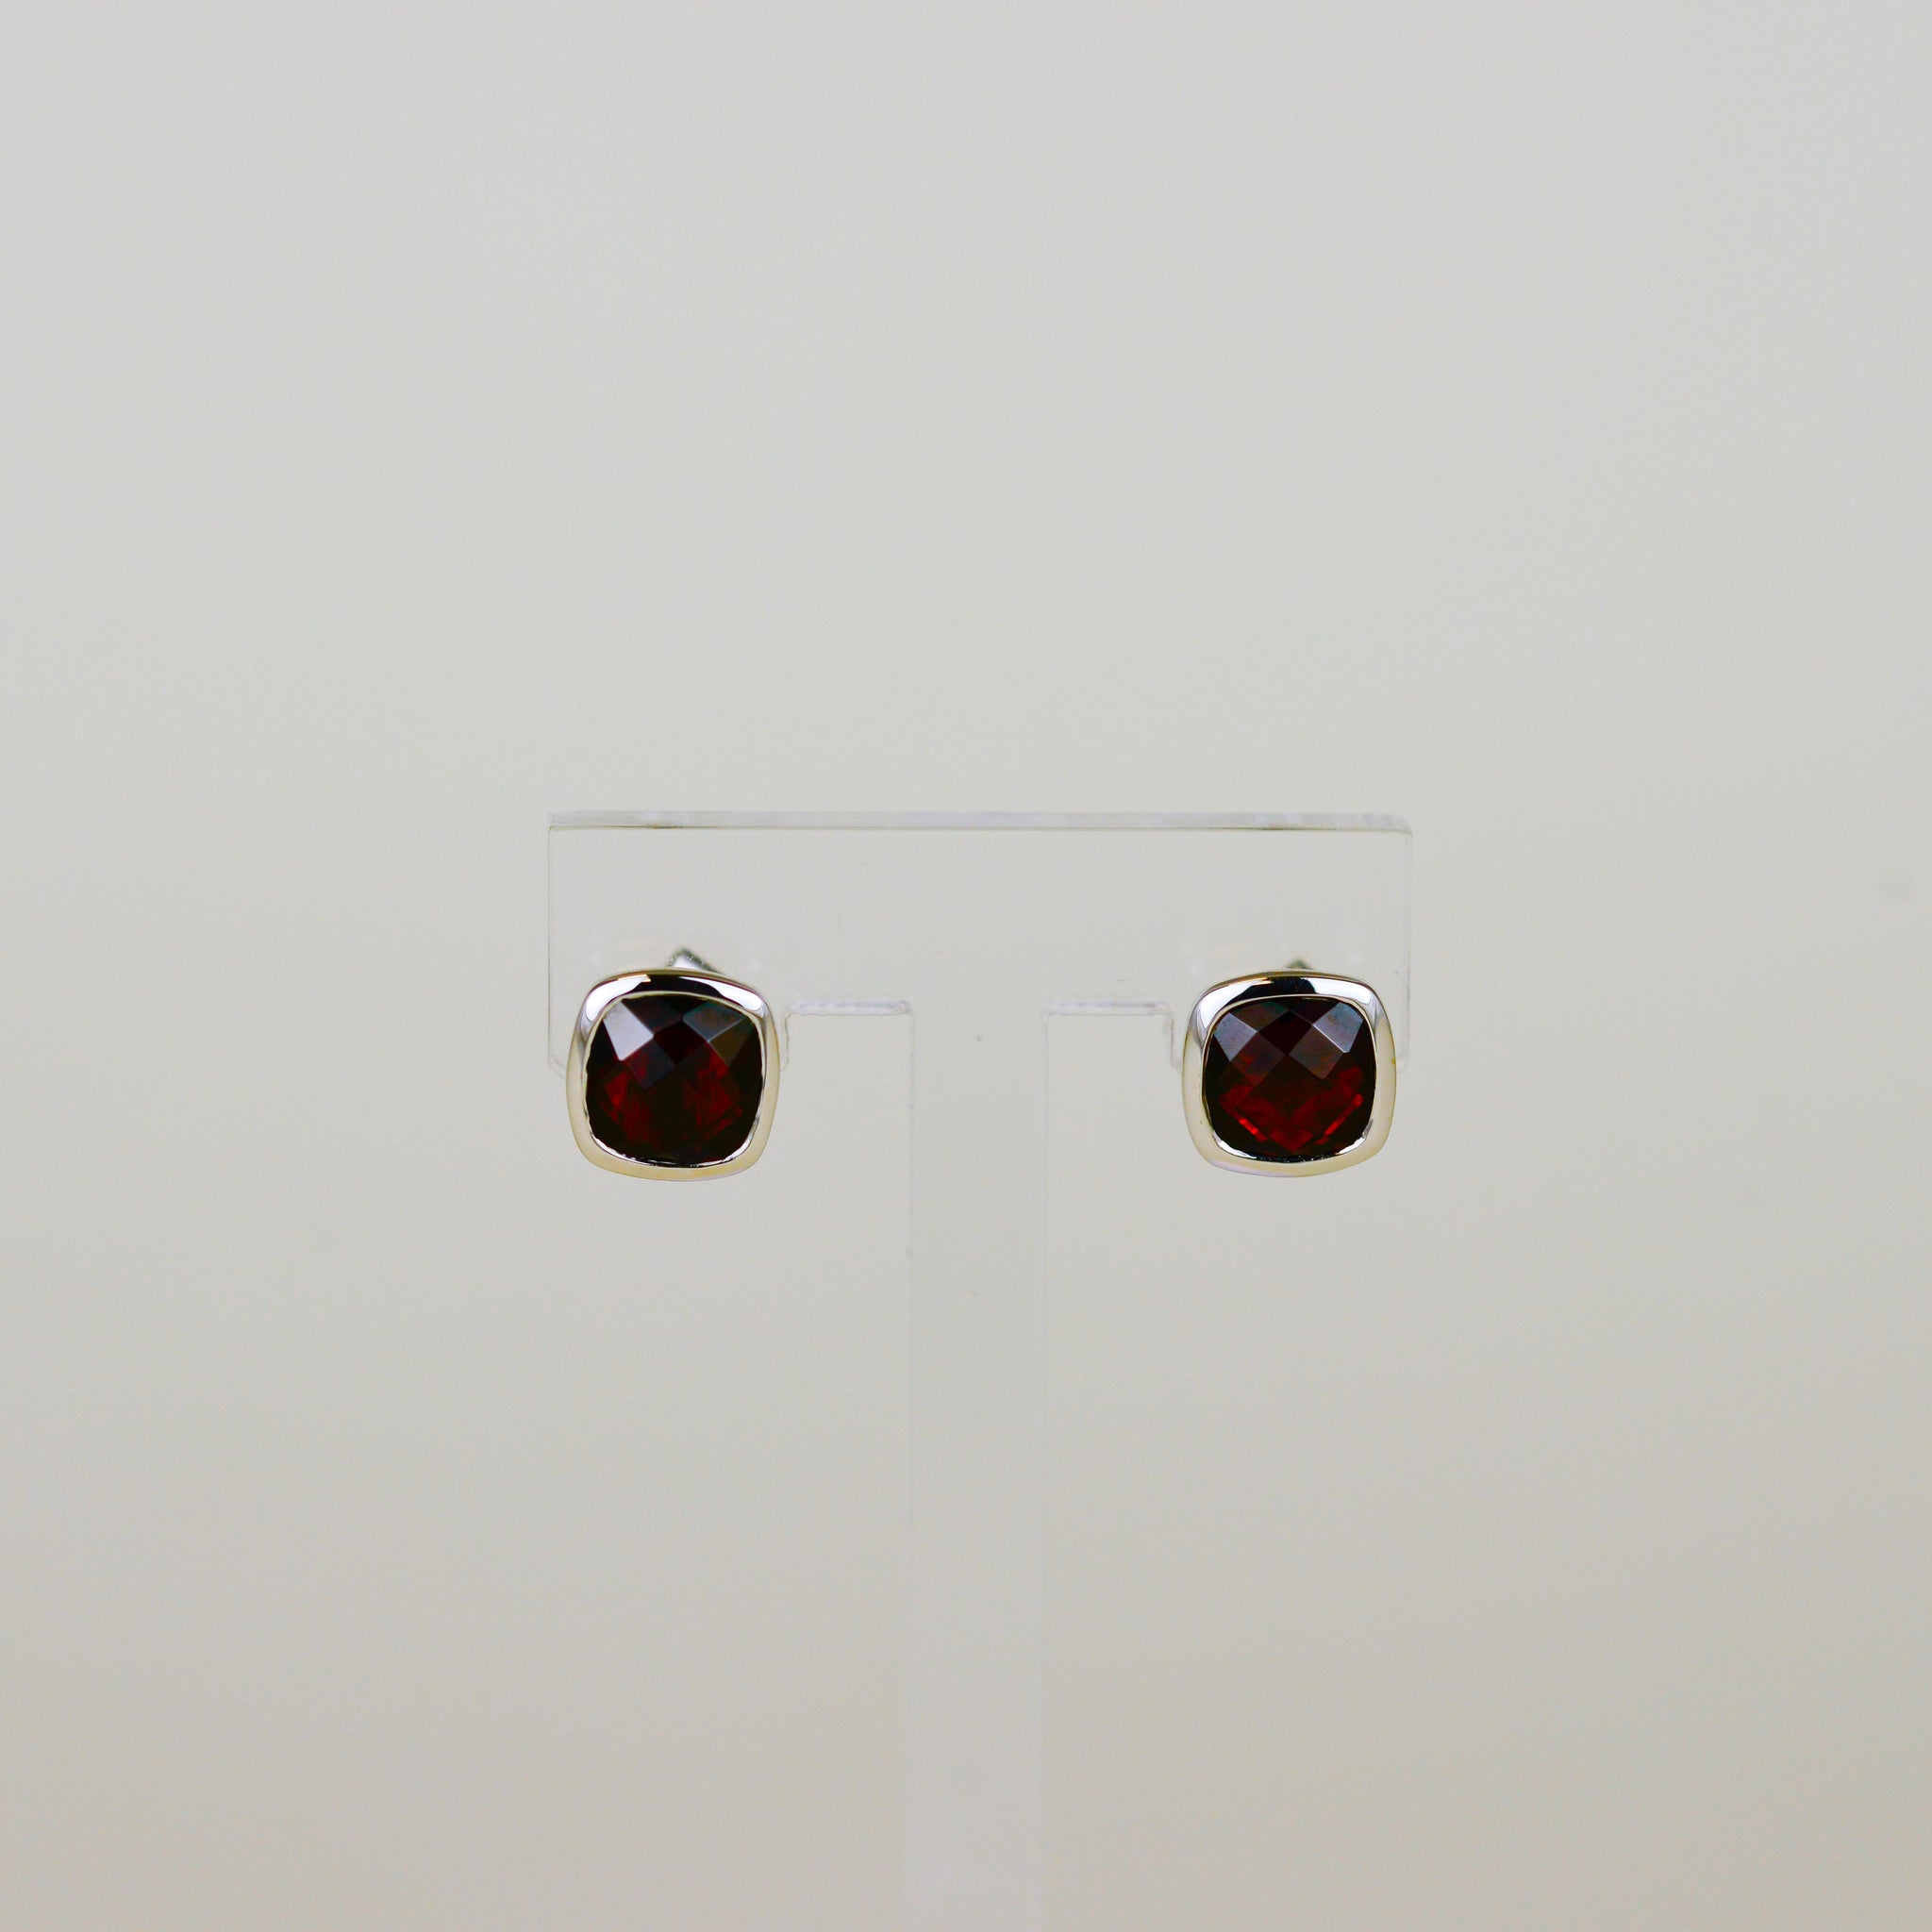 9ct White Gold 4.40ct Square Checkerboard Garnet Stud Earrings